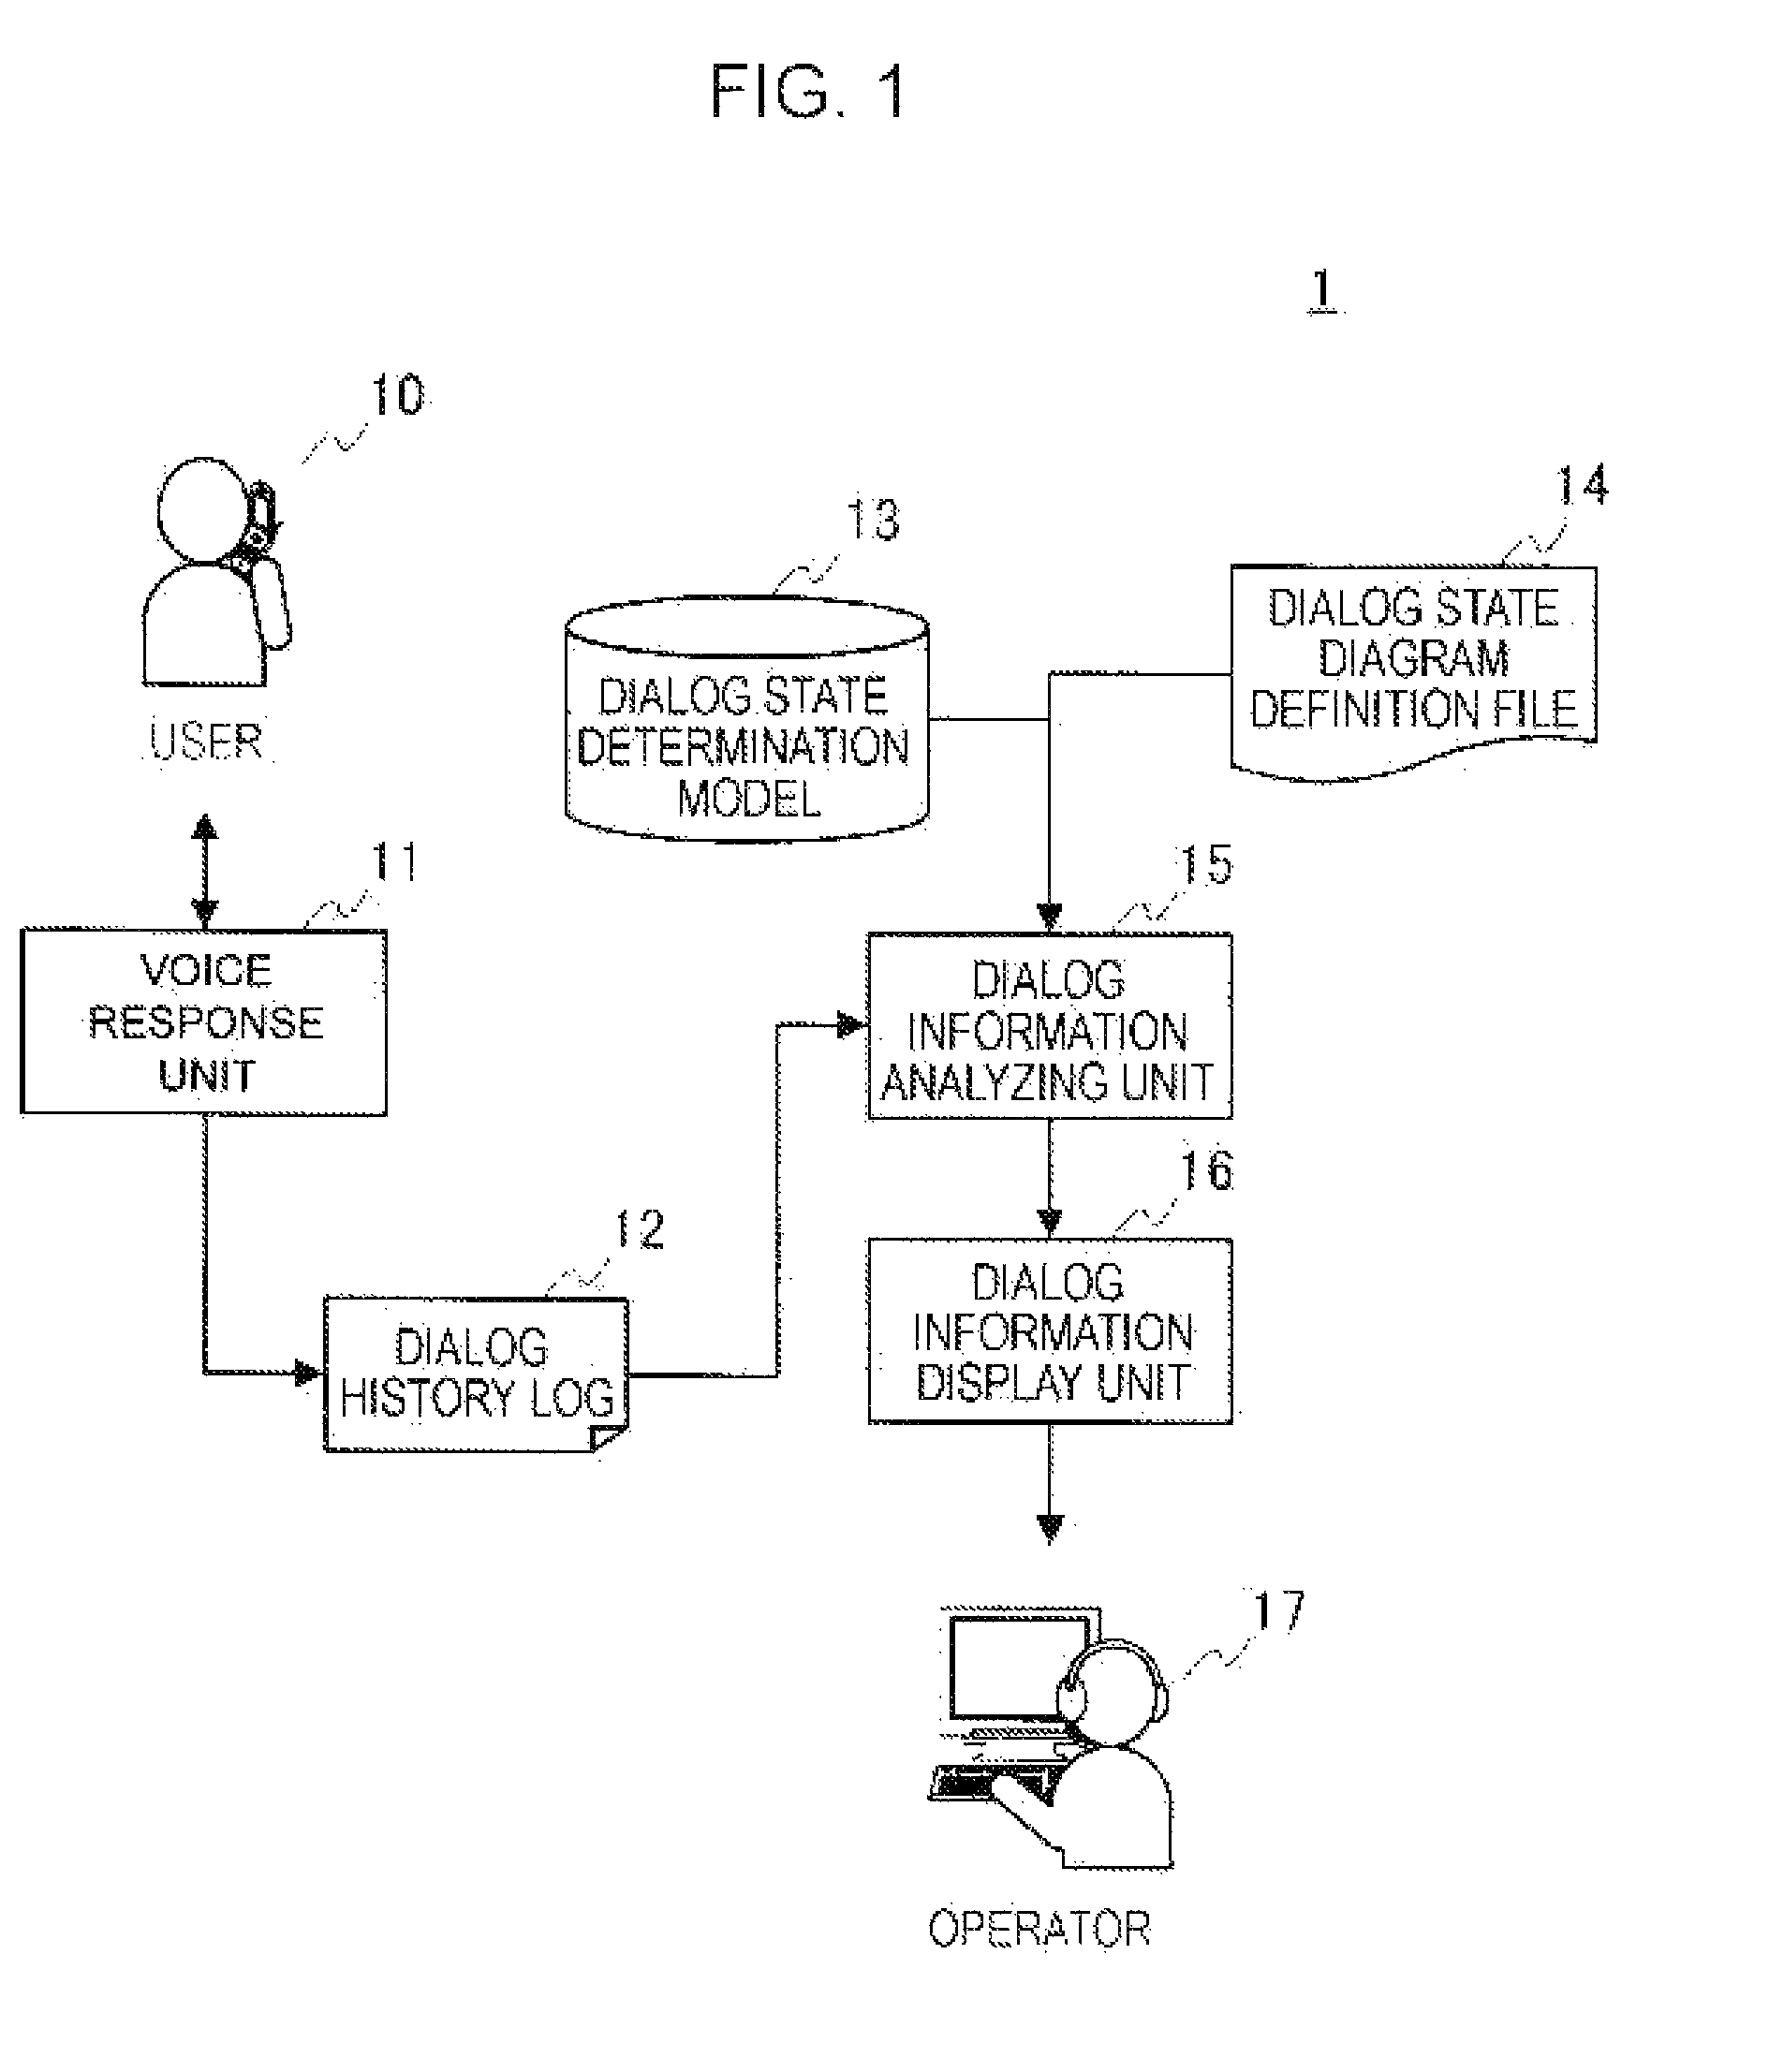 Computer-implemented voice response method using a dialog state diagram to facilitate operator intervention